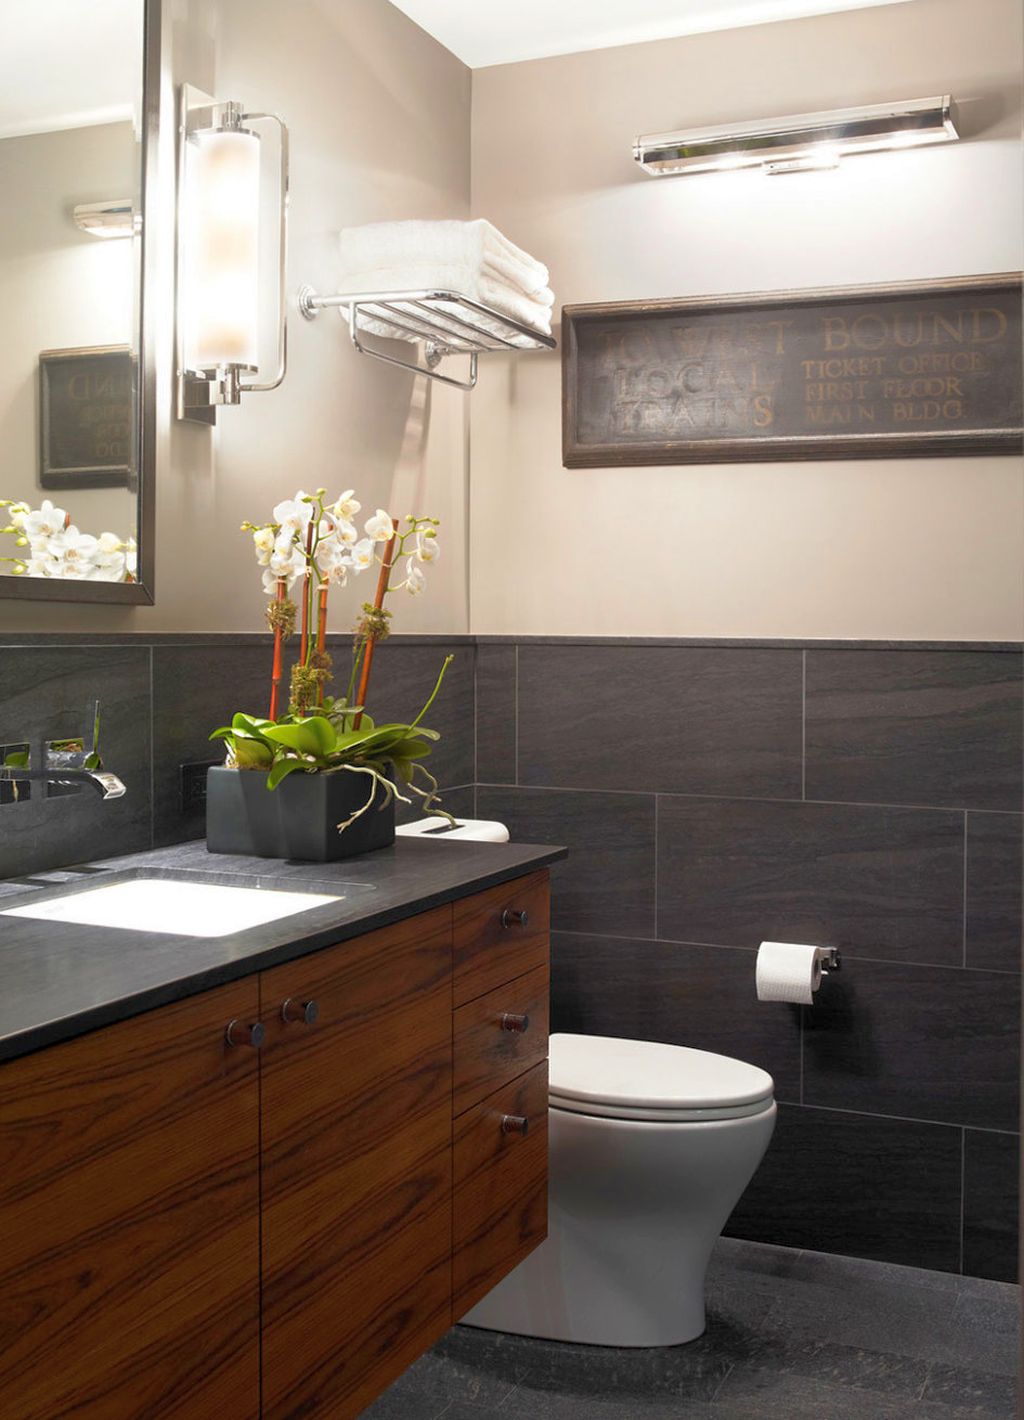 Tiny Bathroom Design Ideas In Black And White With Rustic Wood Cabinets